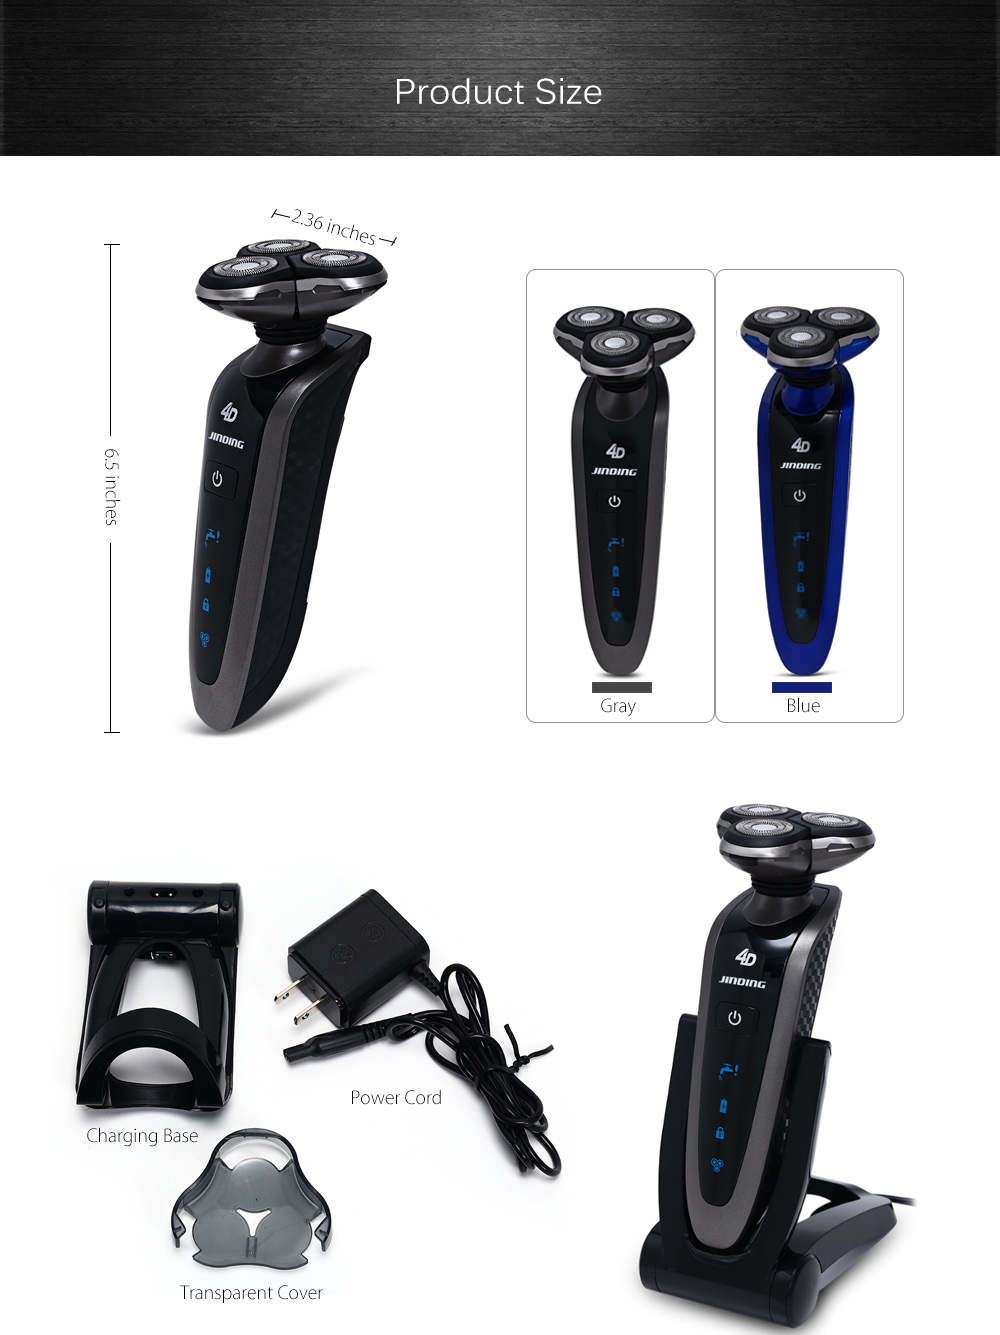 JINDING 5380 Three Blades Electric Shaver with Folding Charging Base for Men